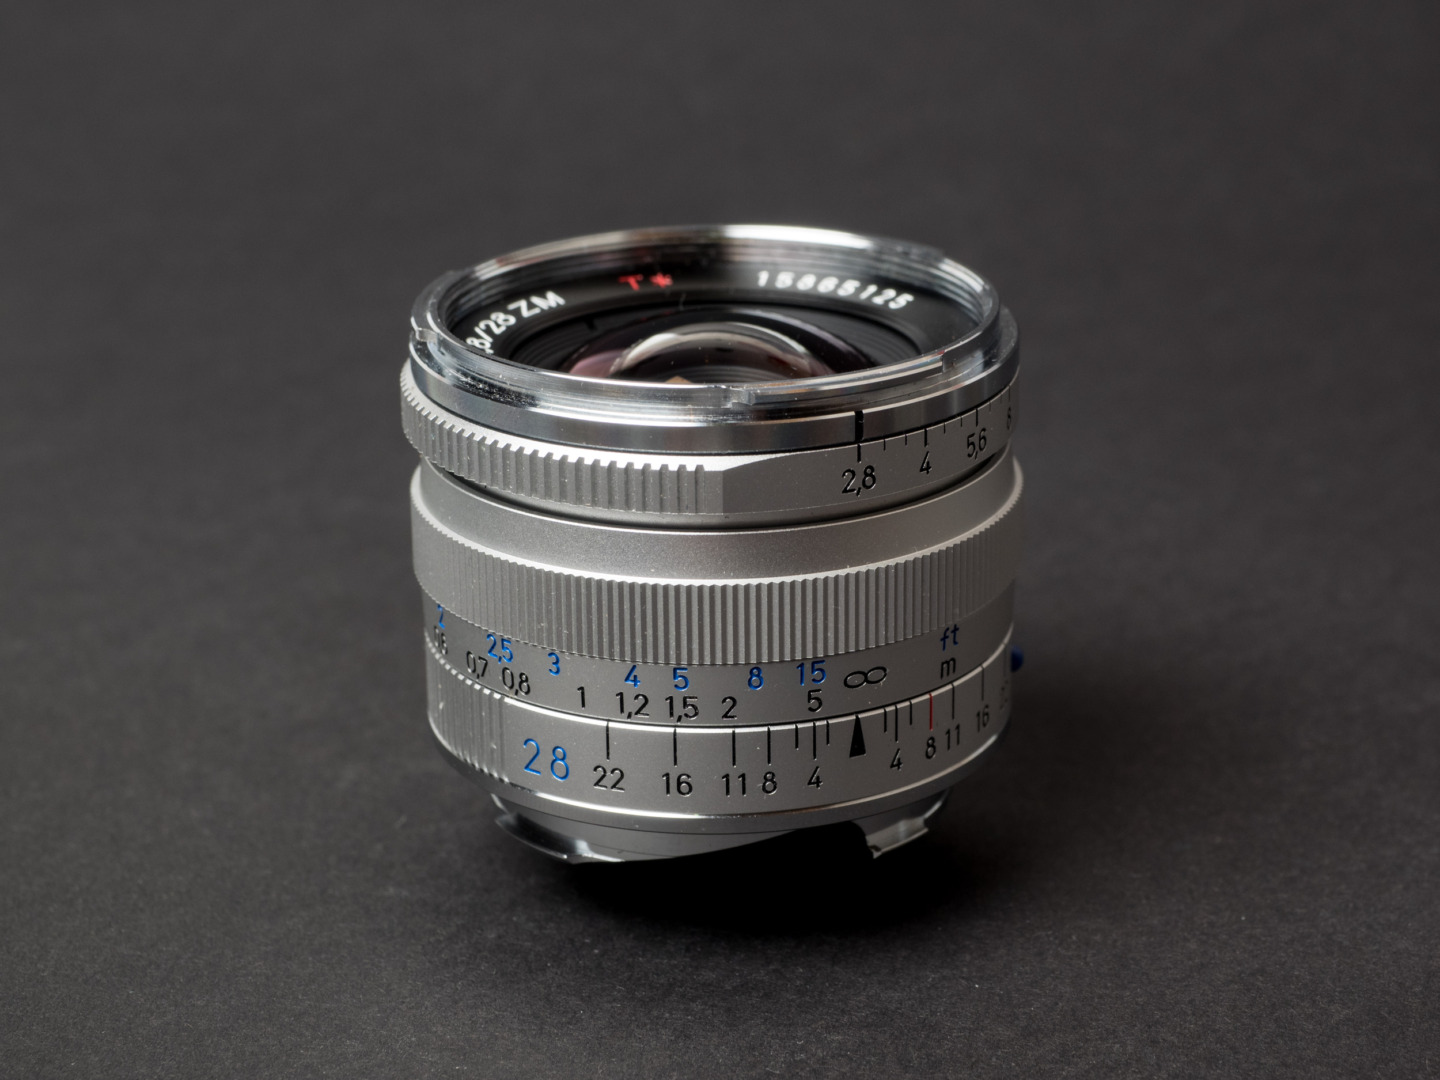 It’s small, but not tiny: Biogon 2,8/21 ZM T* from Carl Zeiss